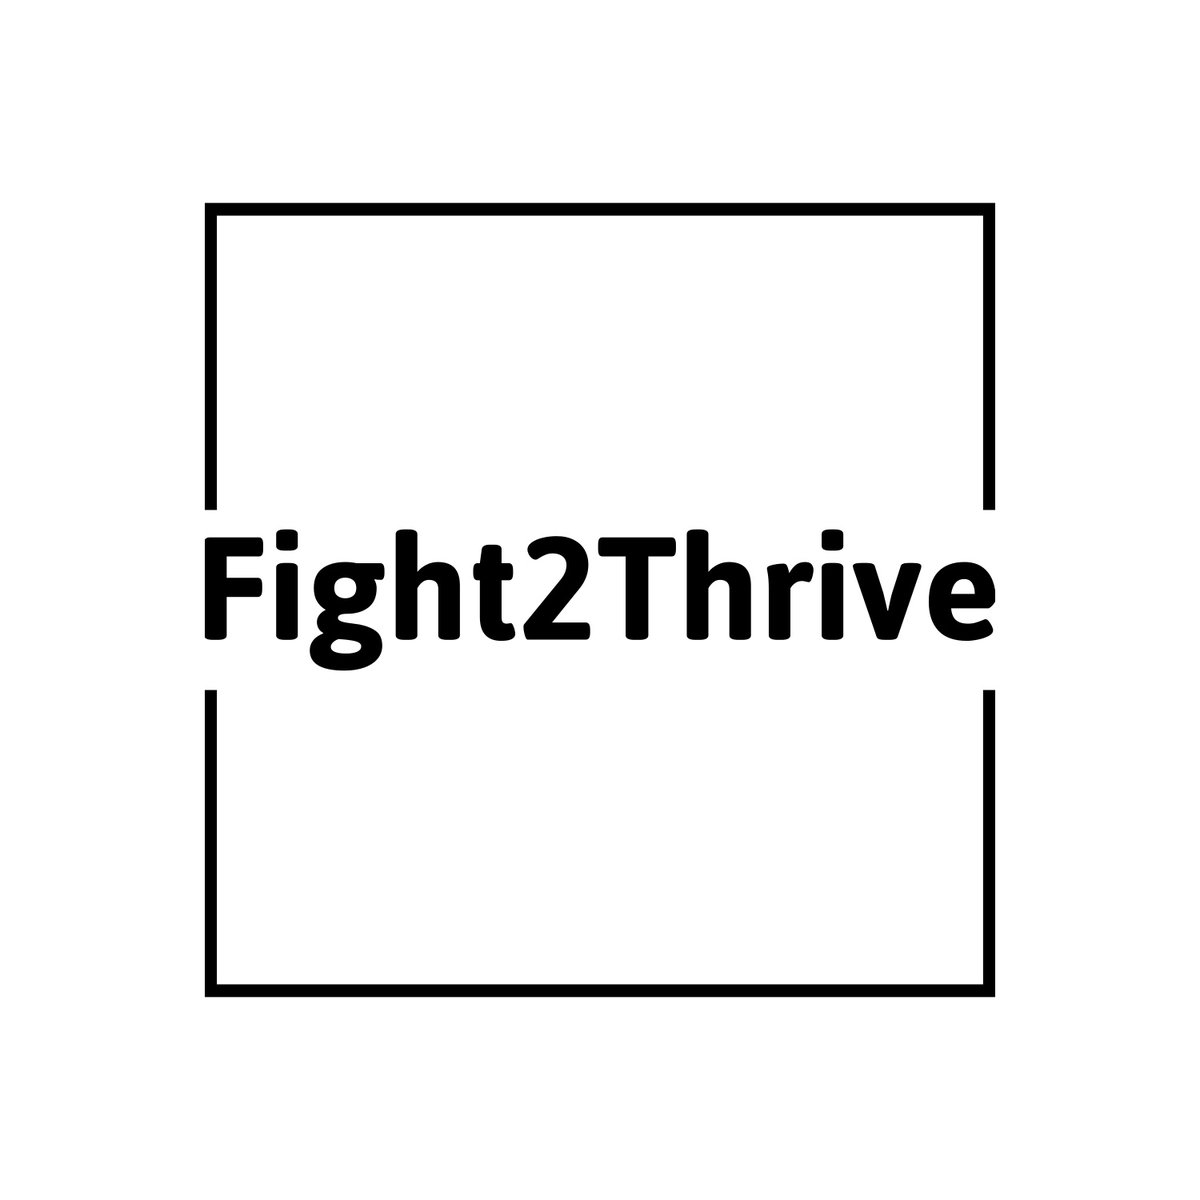 🚀We are very happy to announce that we are an EA APPROVED SUPPLIER! 🚀 We are looking forward to working with groups of young people in schools and youth organisation's. #Fight2Thrive 🌱 Visit- fight2thrive.com Contact- info@fight2thrive.com fight2thrive.com